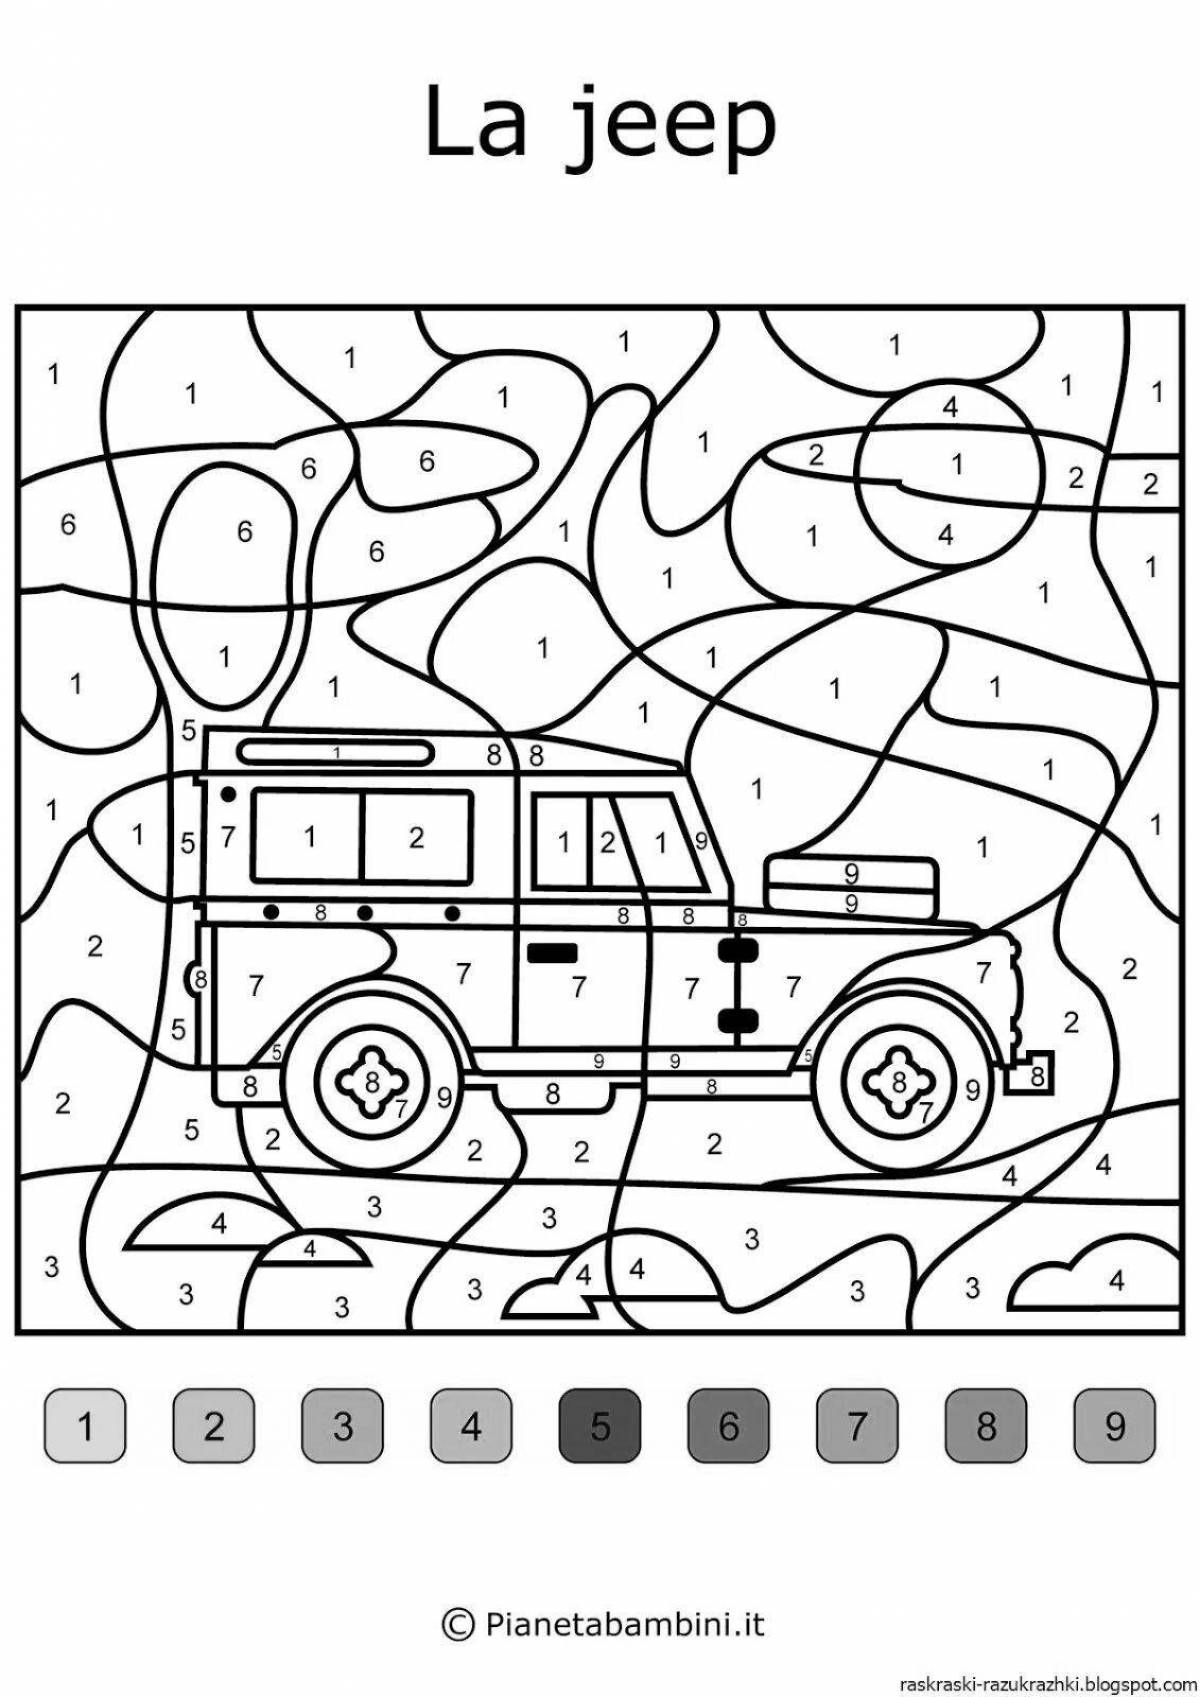 Inviting coloring by numbers for children 5-7 years old